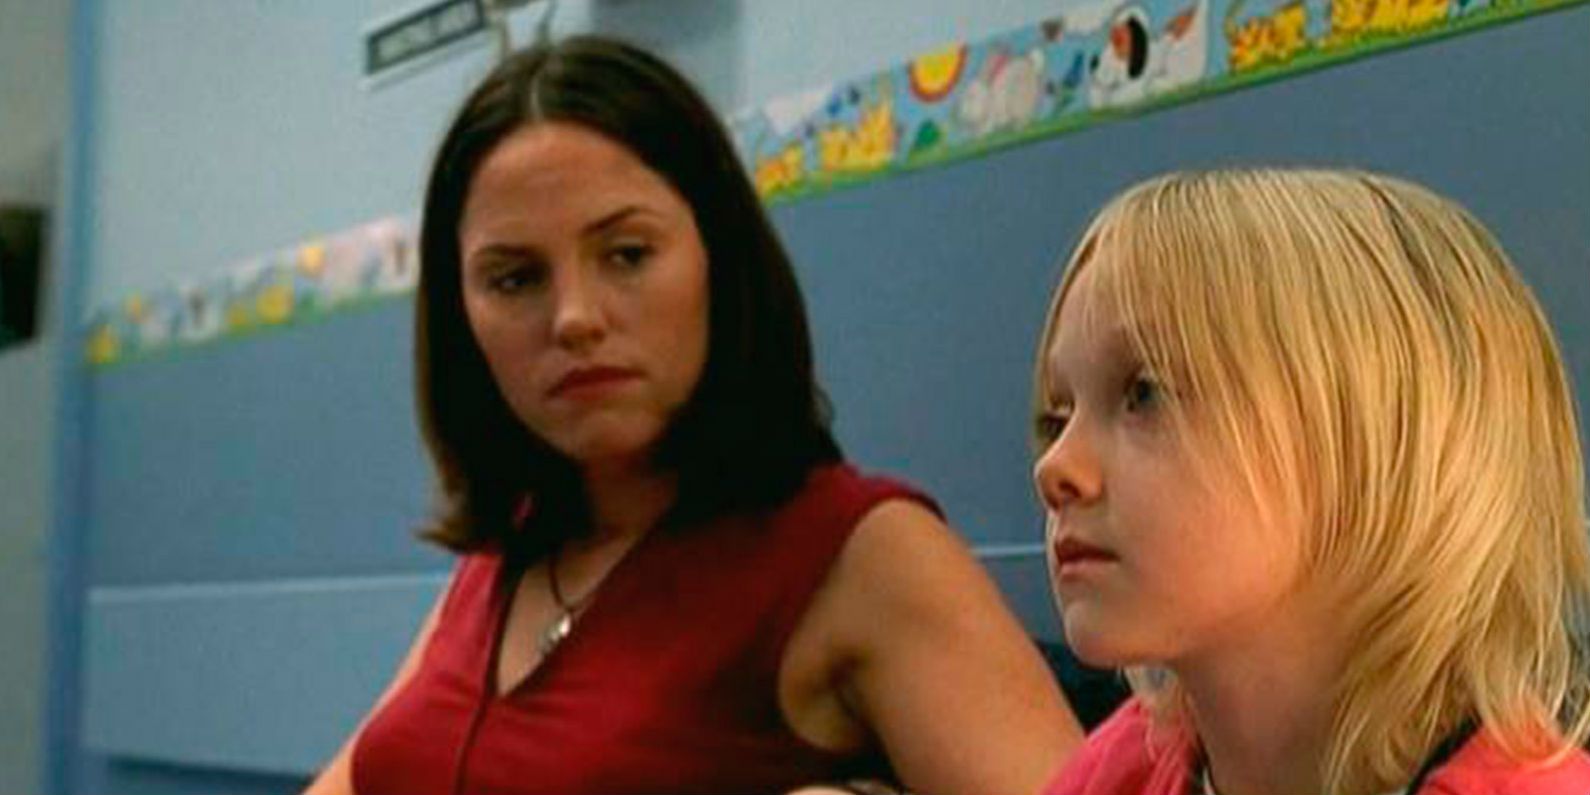 A woman looks at a young girl in CSI Miami